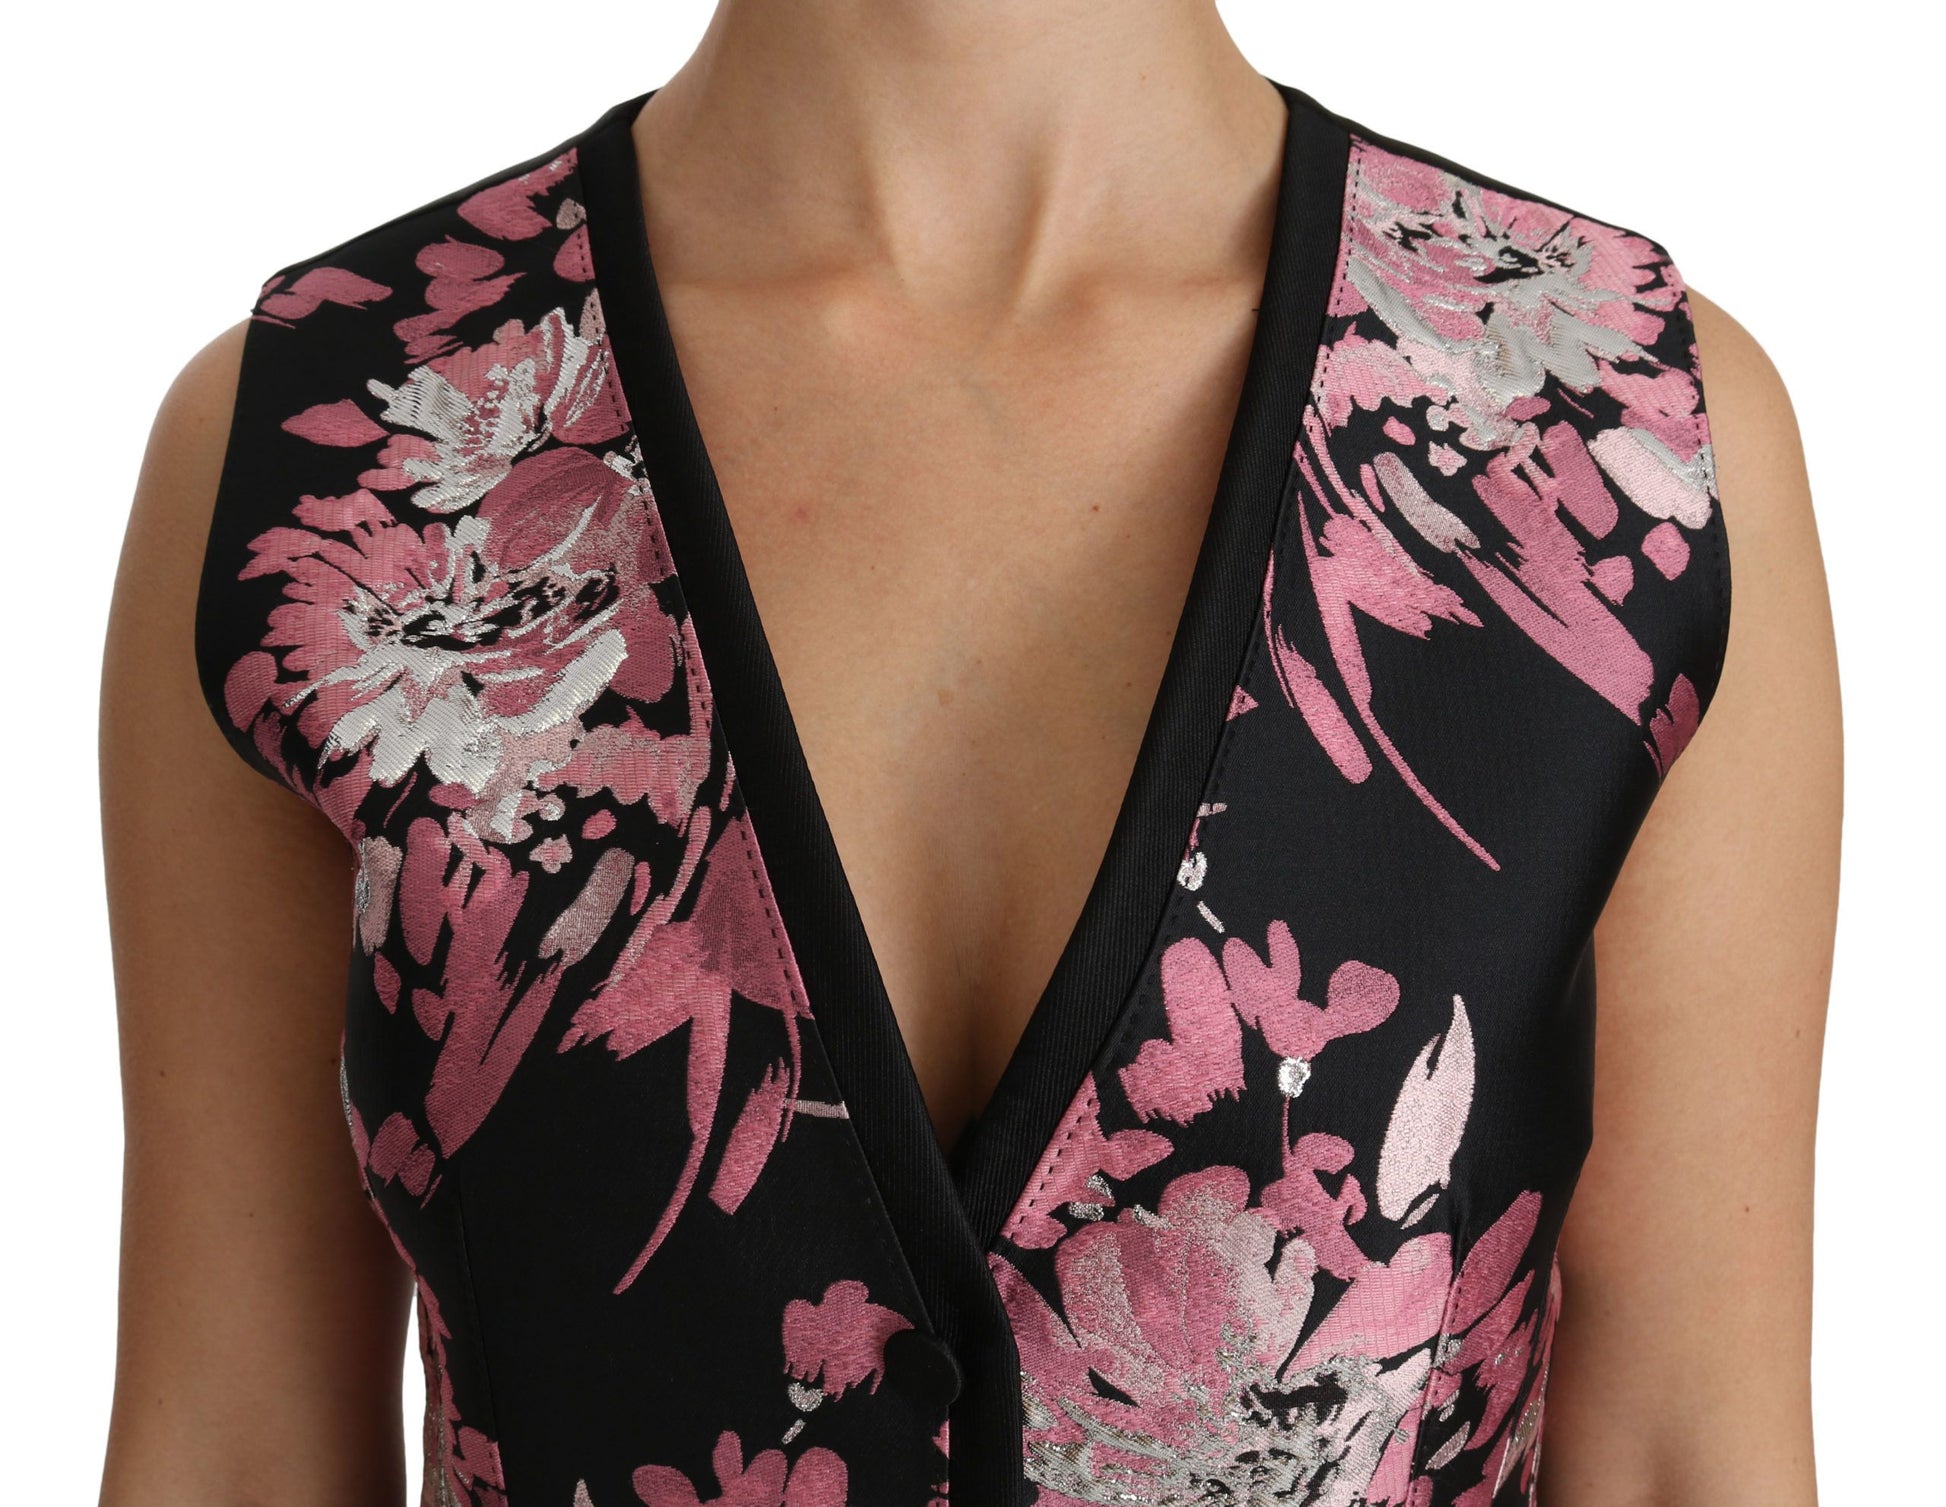 Dolce & Gabbana Ladies' Black Pink Floral Waistcoat Vest Blouse Top - Designed by Dolce & Gabbana Available to Buy at a Discounted Price on Moon Behind The Hill Online Designer Discount Store